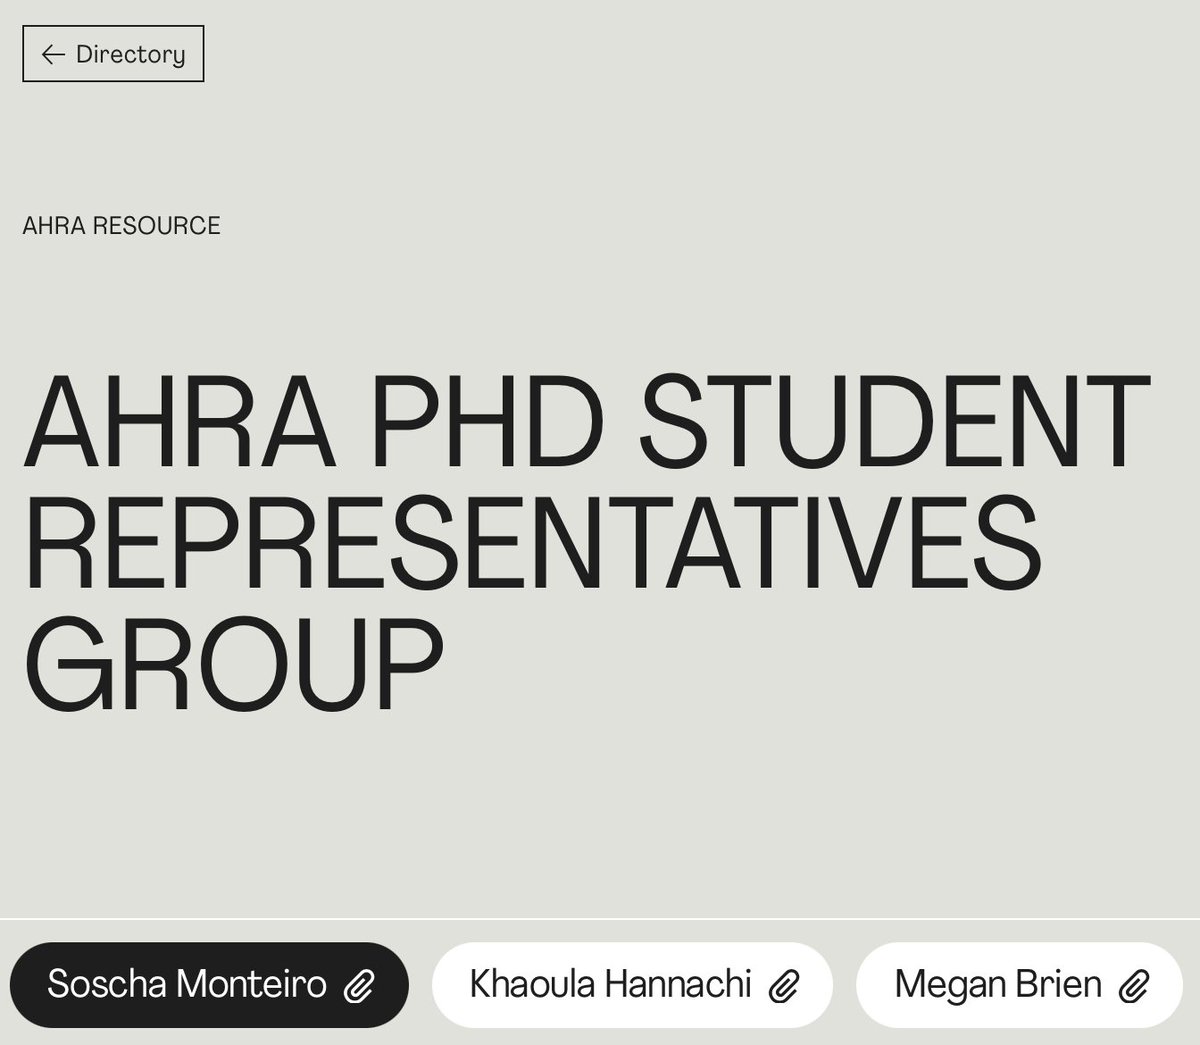 The AHRA Steering Group was recently joined by three outstanding international PhD Students. In a post on our website they share their ambition. Check it out and get engaged! Thank you for the initiative @Megan_Brien, @KhaoulaHNCHI, Soscha Monteiro. We are very proud to have you!